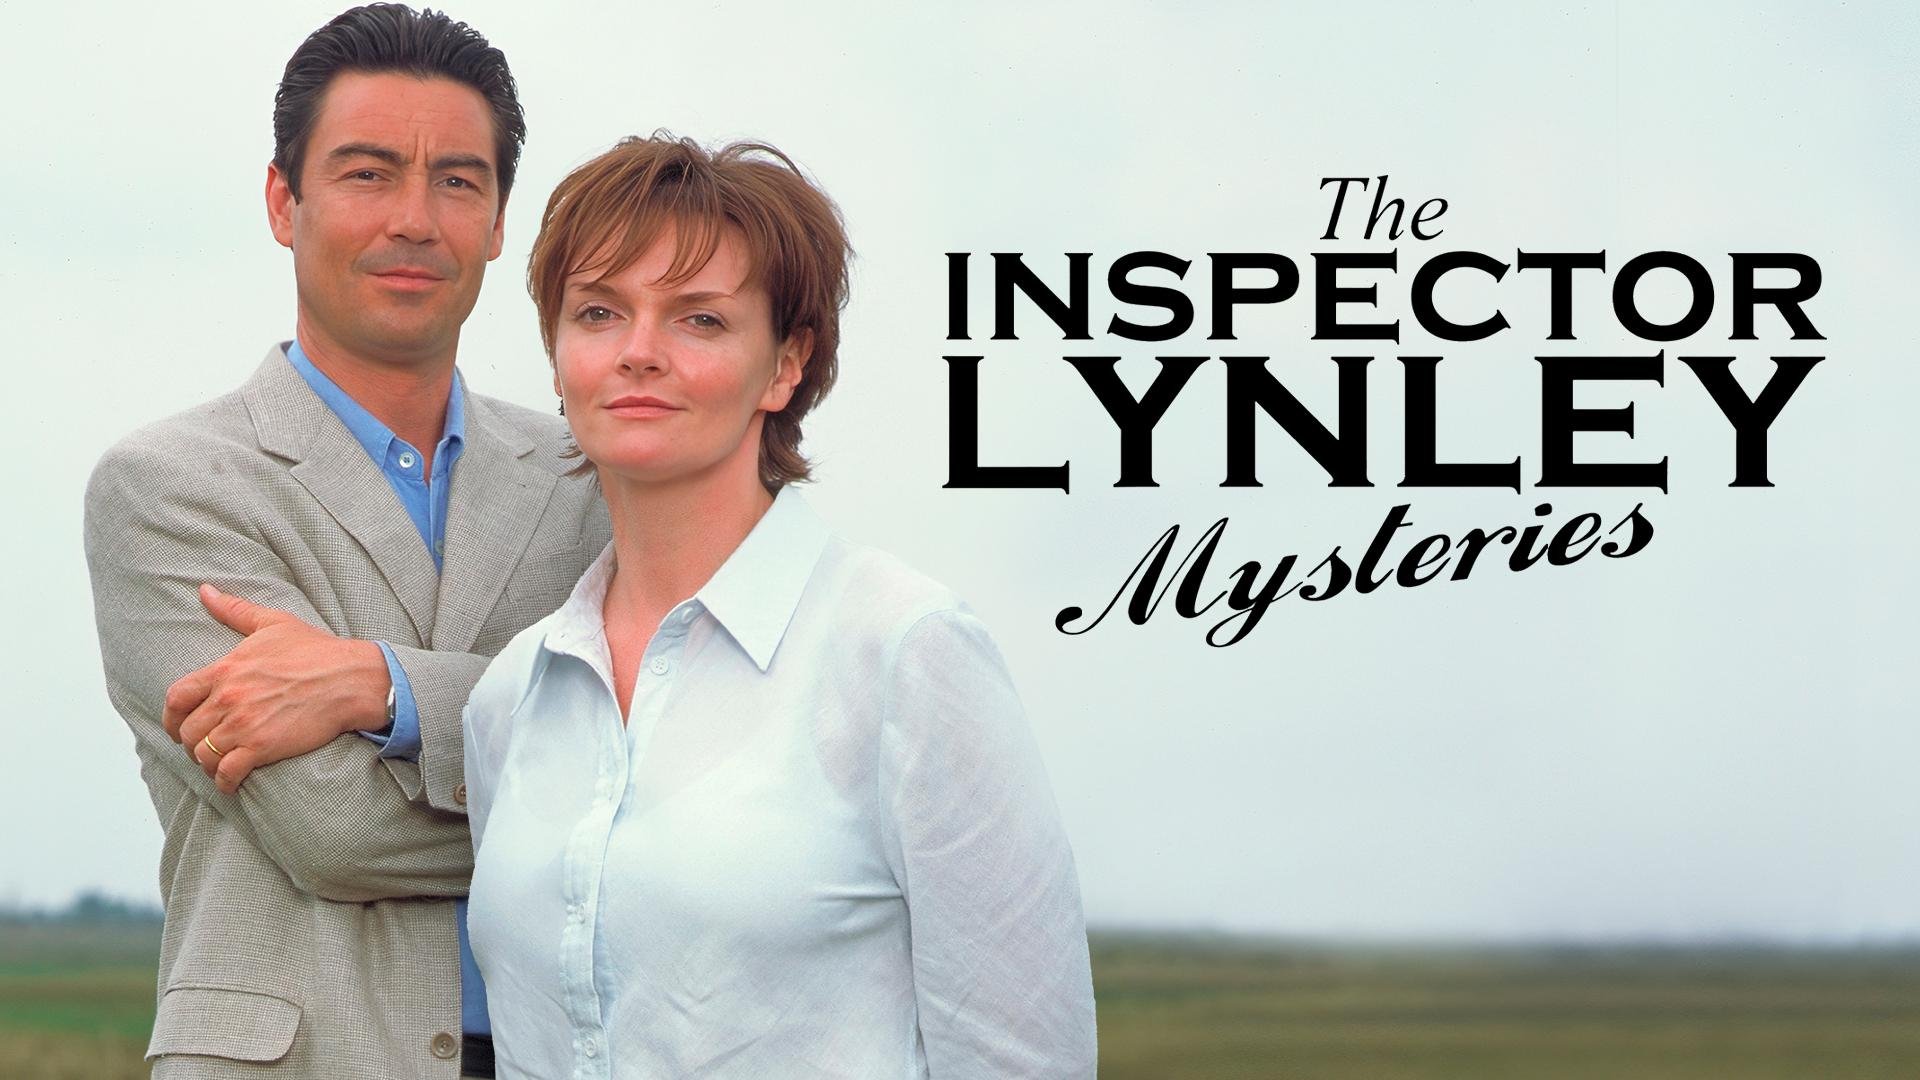 Watch The Inspector Lynley Mysteries Online - Stream Full Episodes